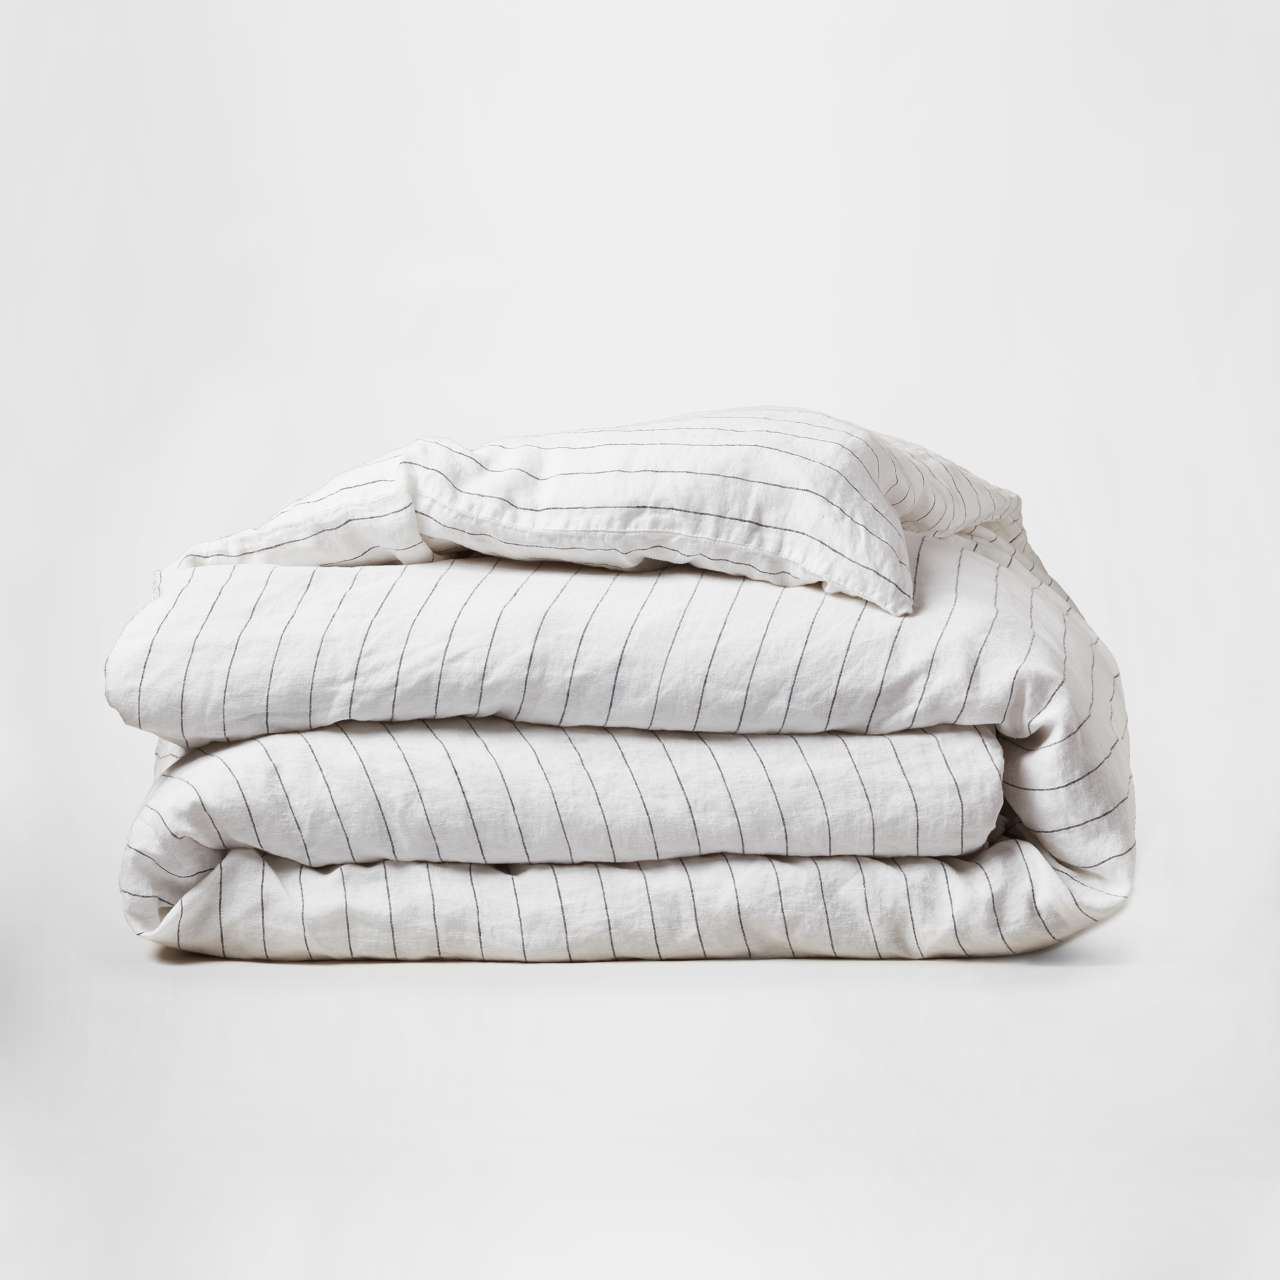 Flax Linen Bed Sheets Image 1